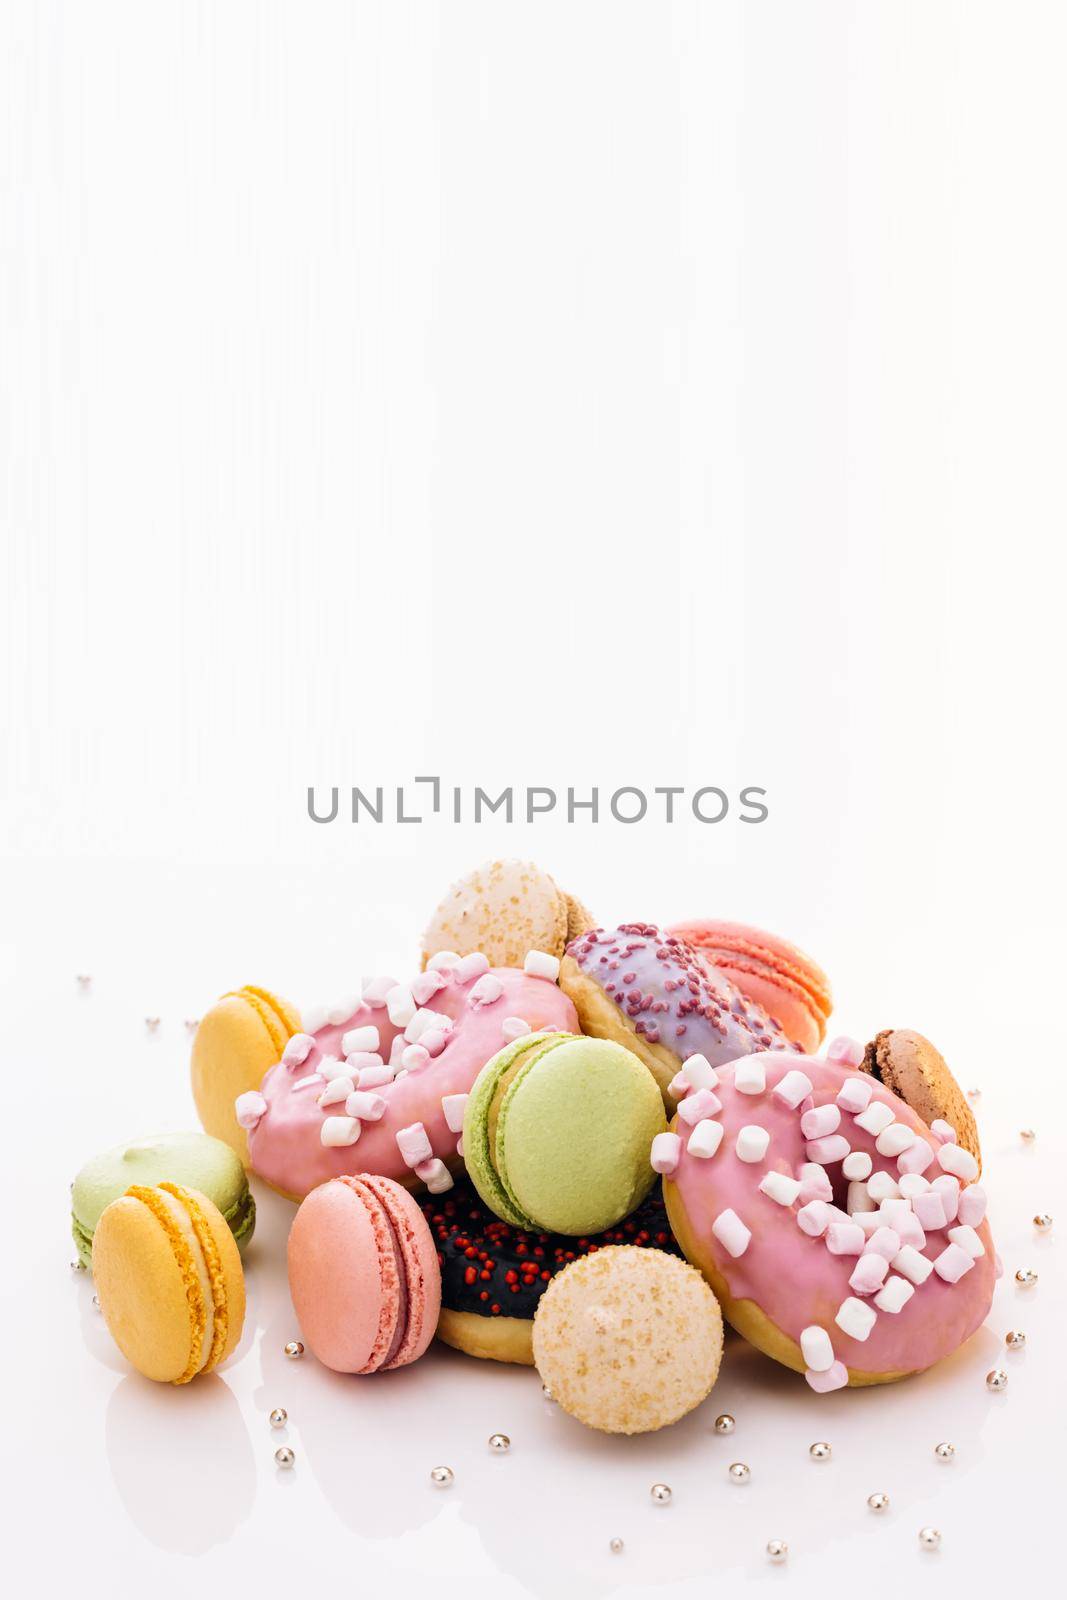 Many multi-colored macarons donuts with different tastes, dessert. Macaroons and donuts on a white background. French macaroons by uflypro